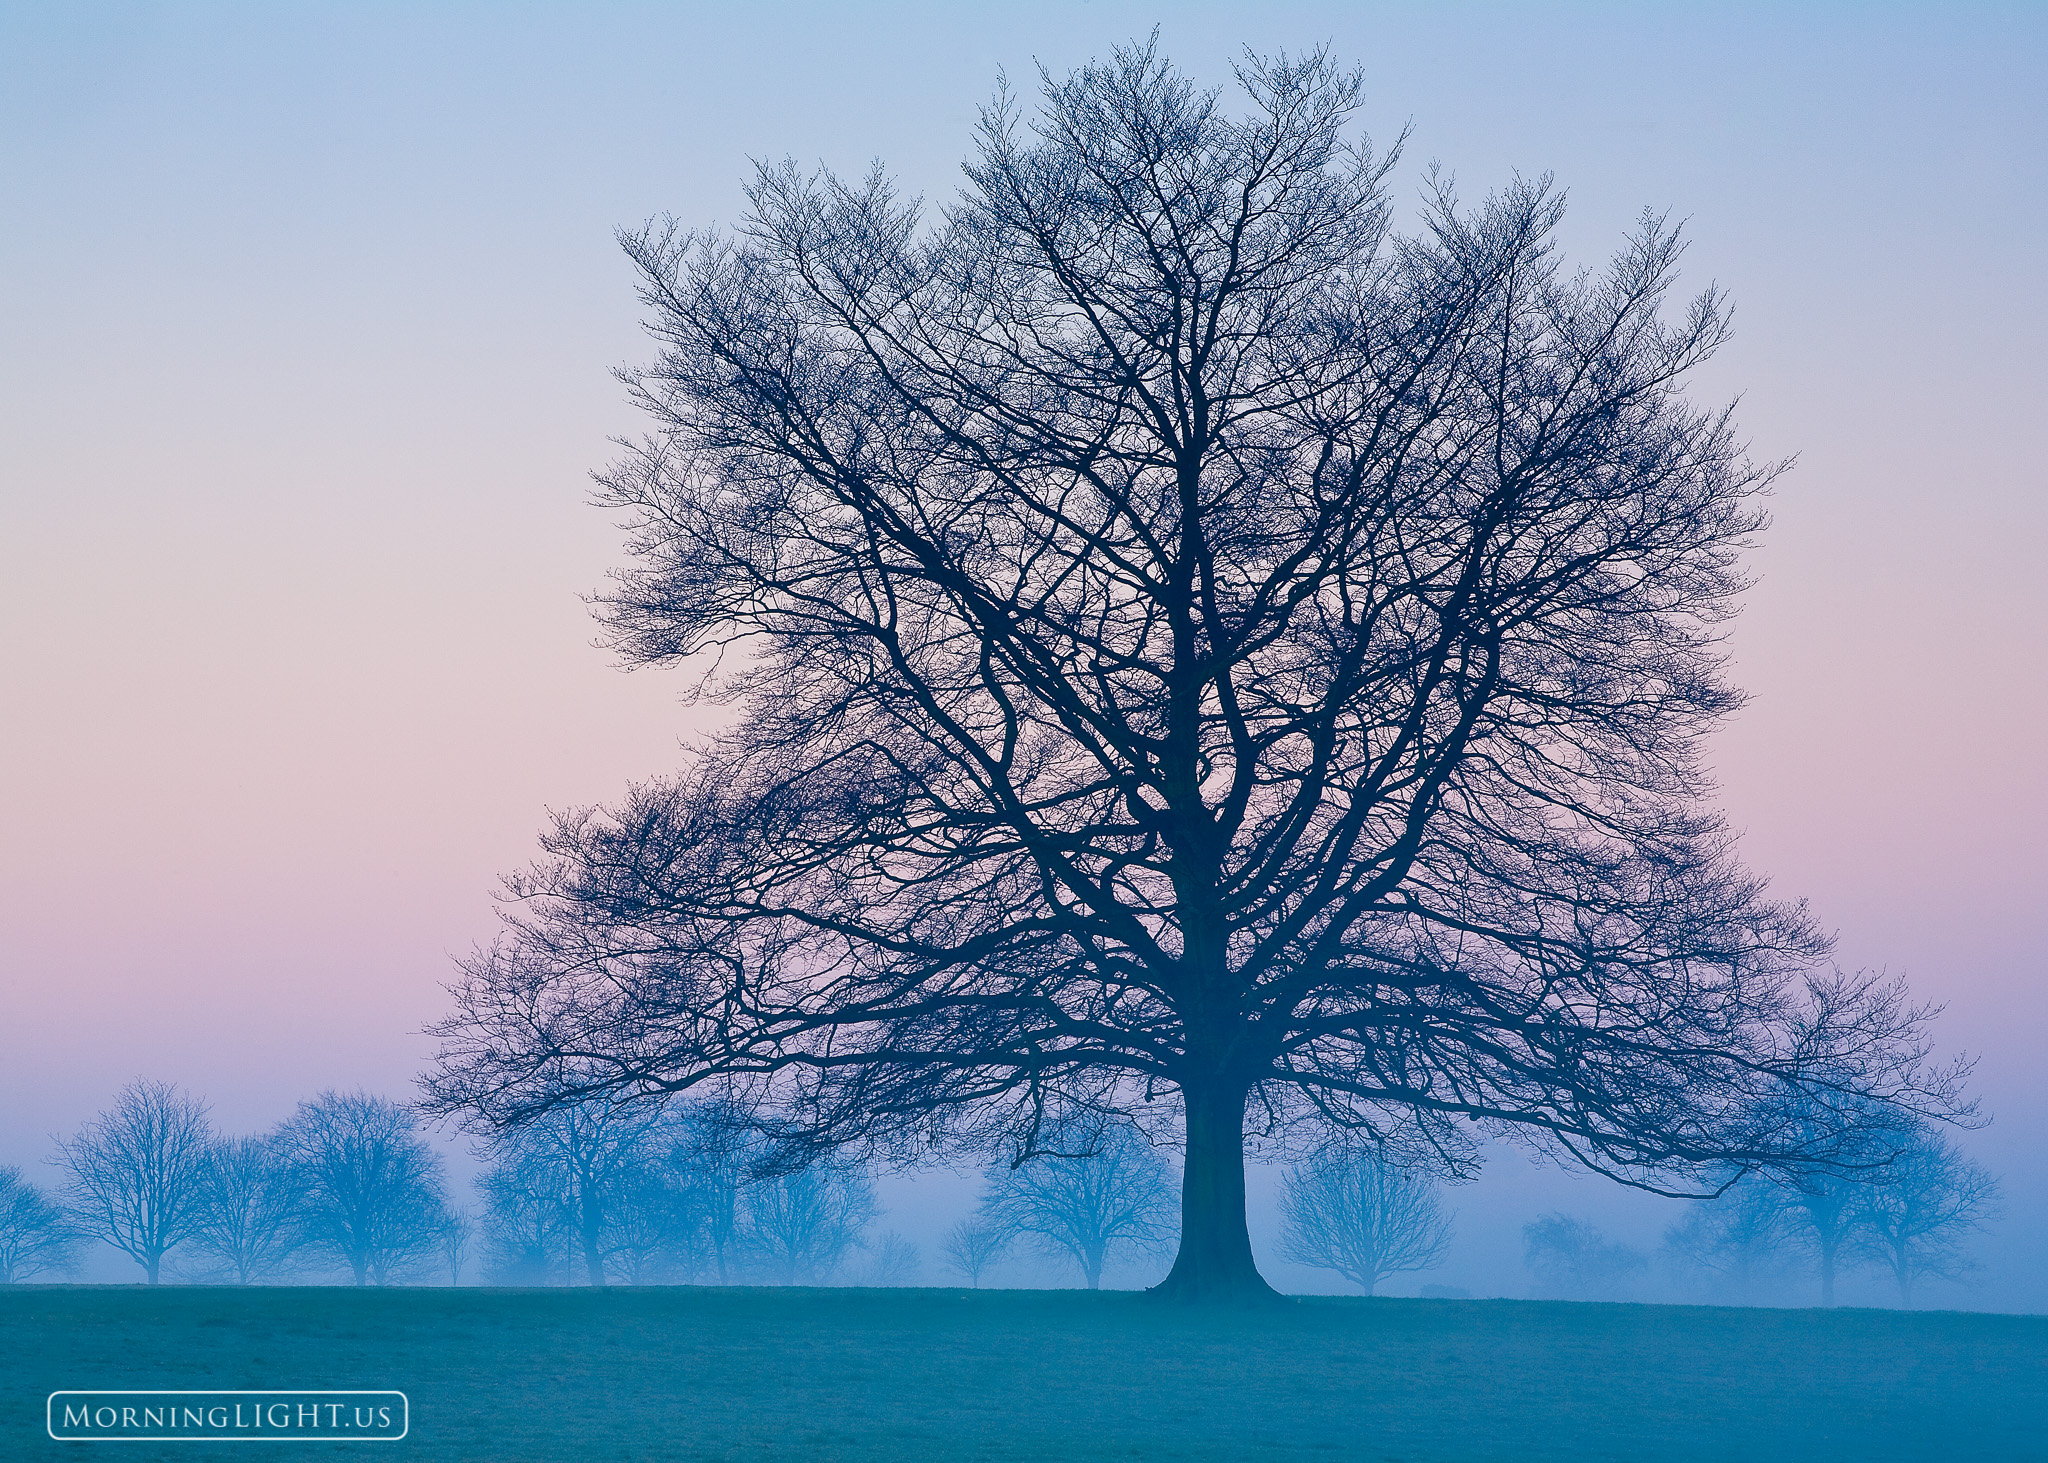 A perfectly formed tree silhouetted at sunrise on a foggy morning.